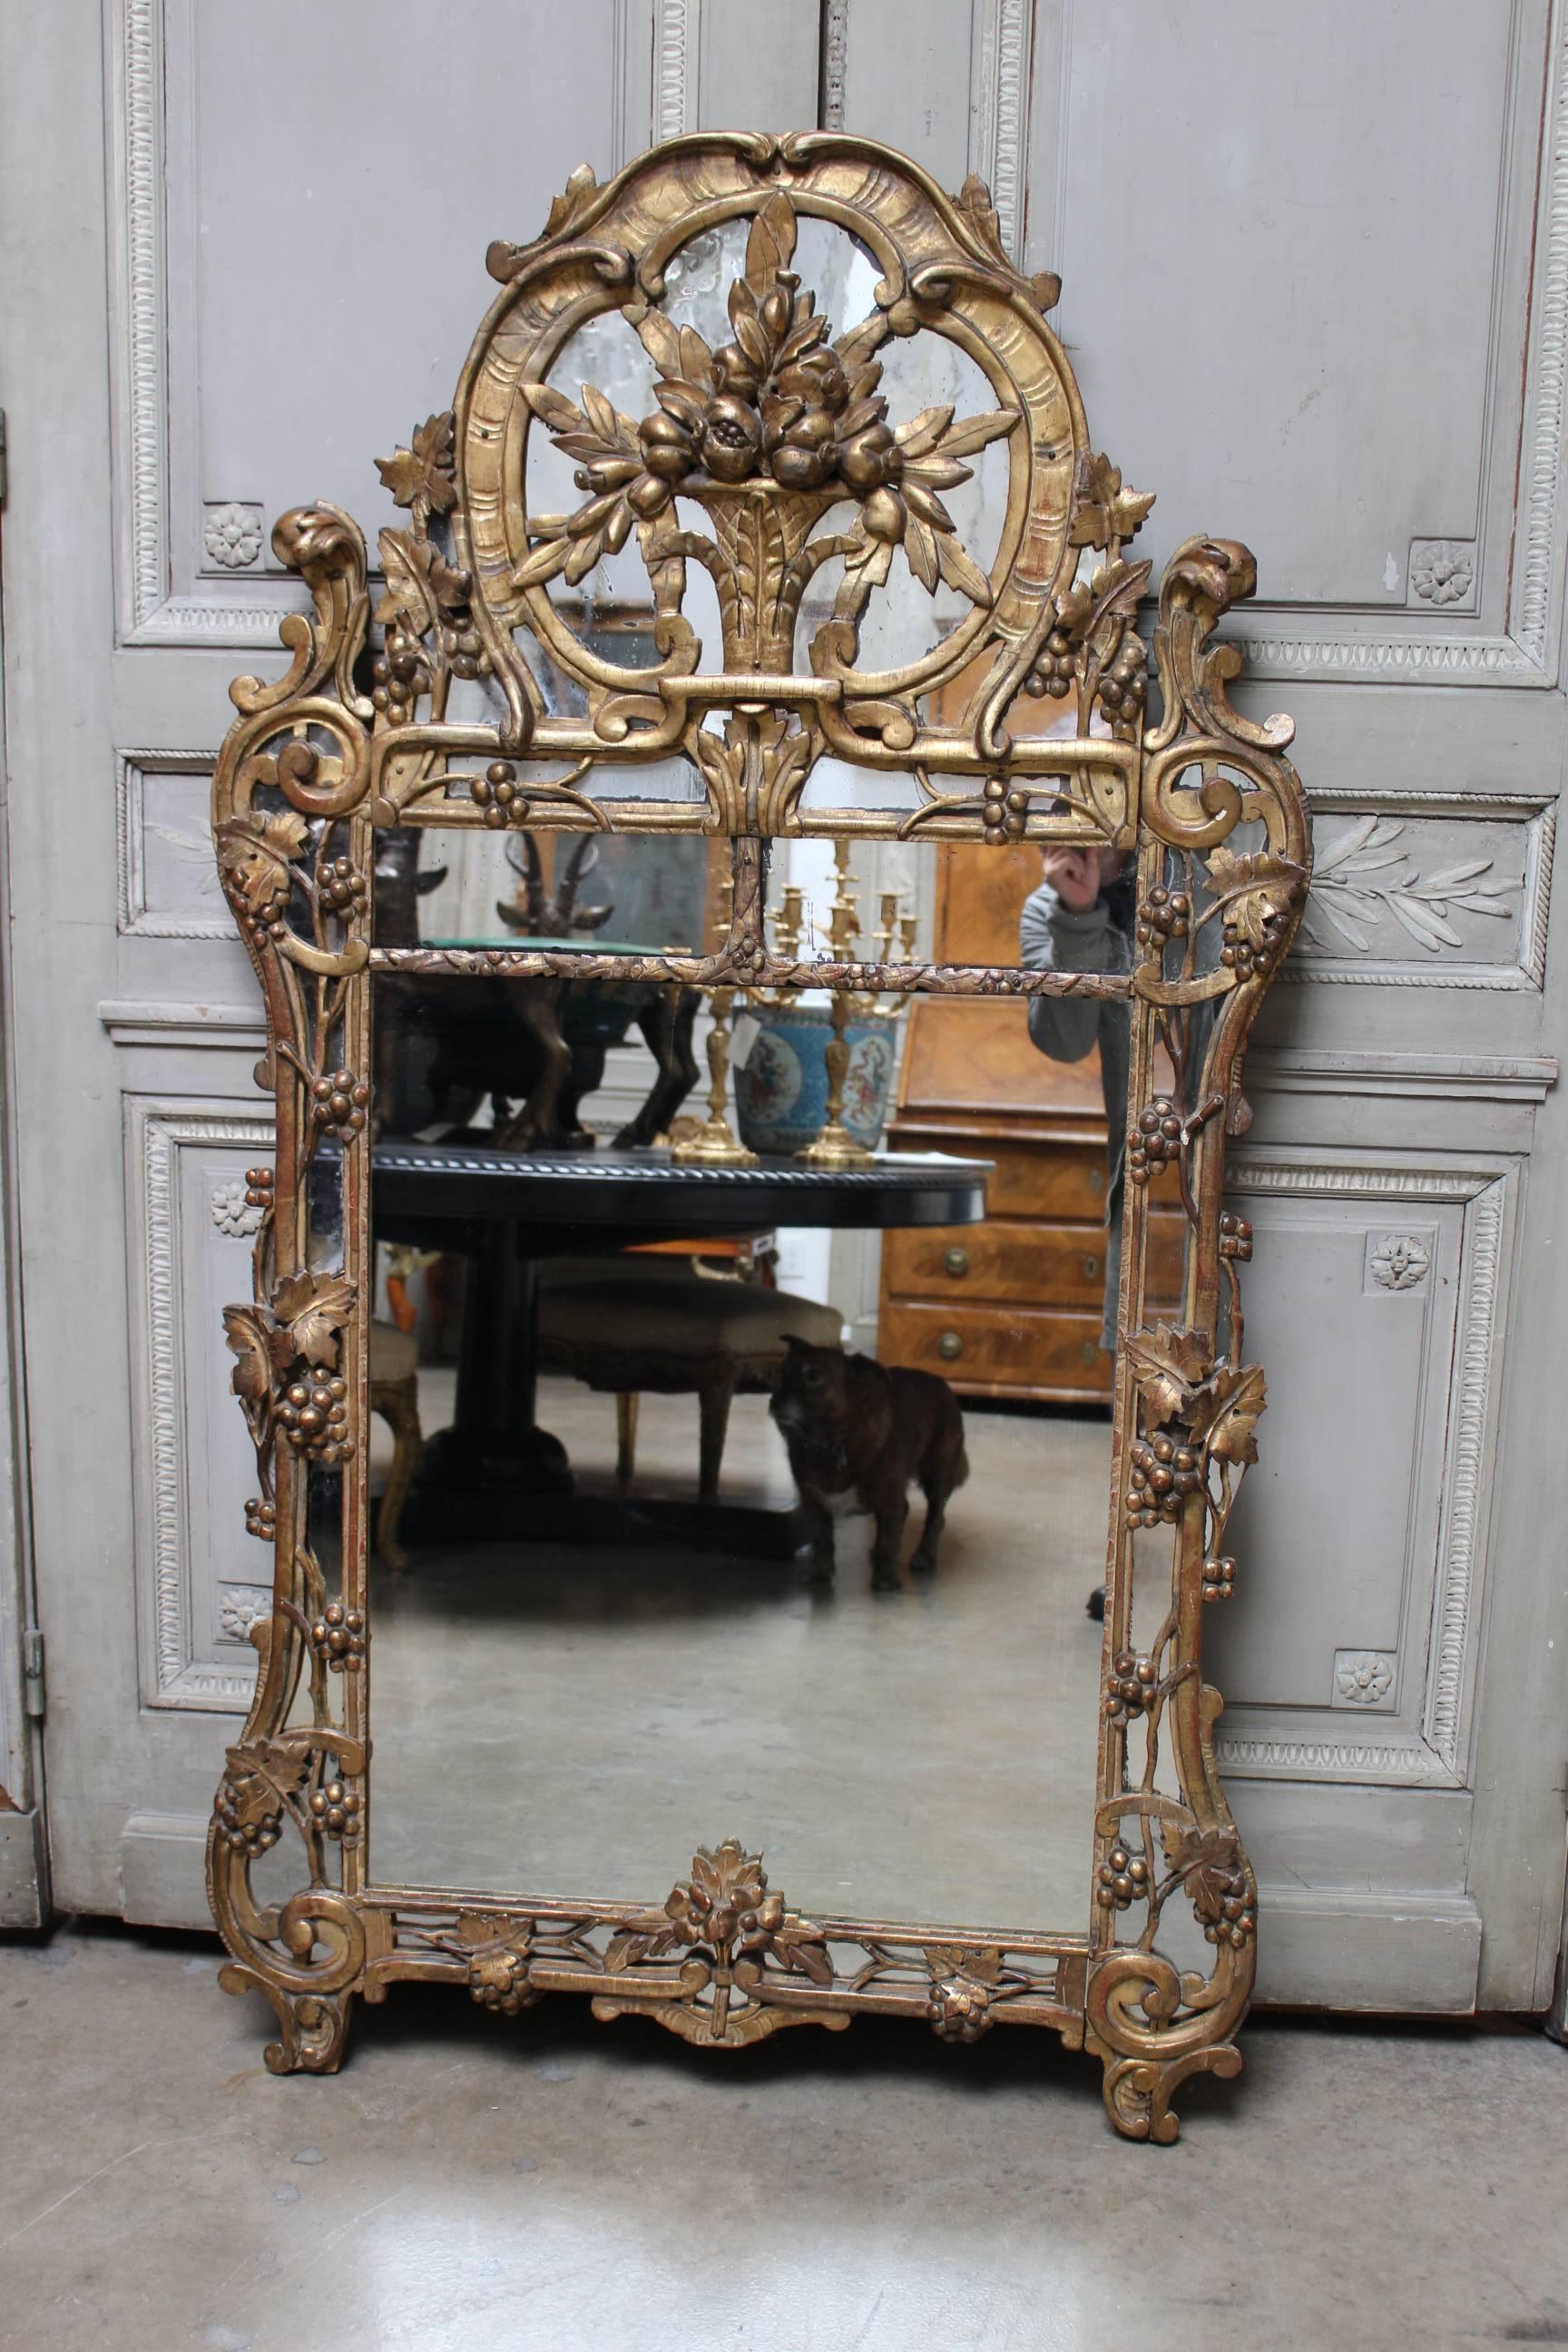 A large French Regence gilded plaster and wood mirror.